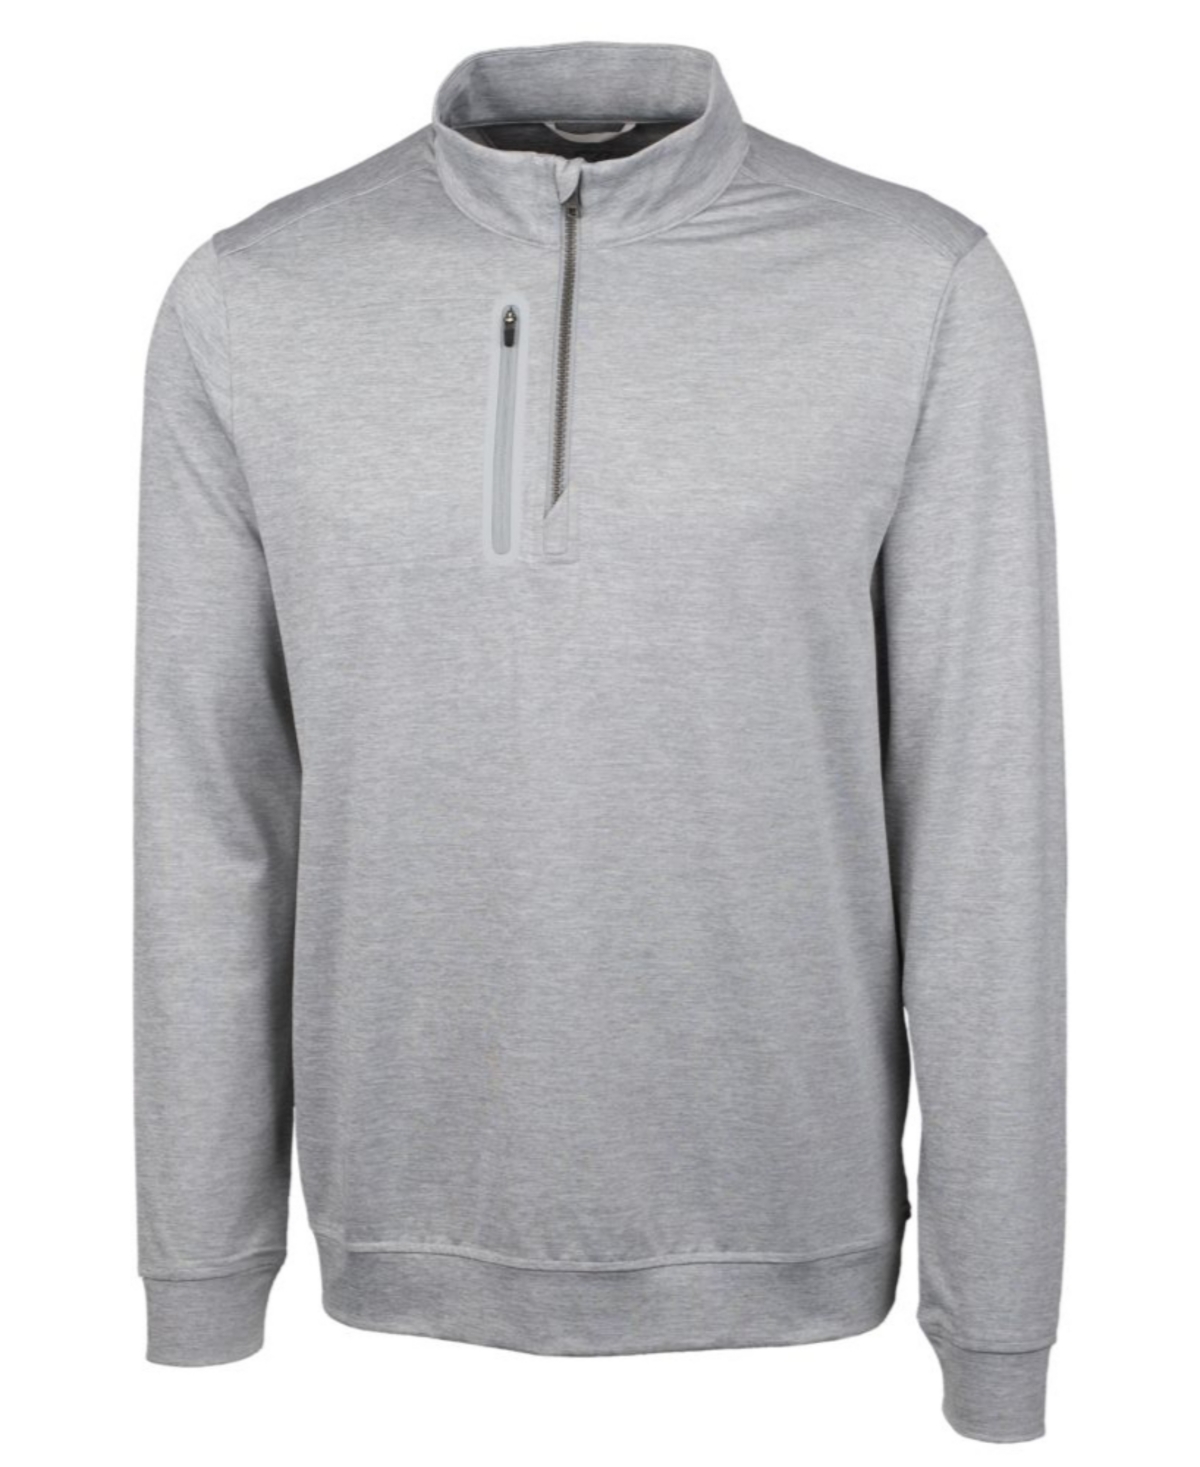 Big & Tall Stealth Heathered Quarter Zip Pullover Jacket - Polished